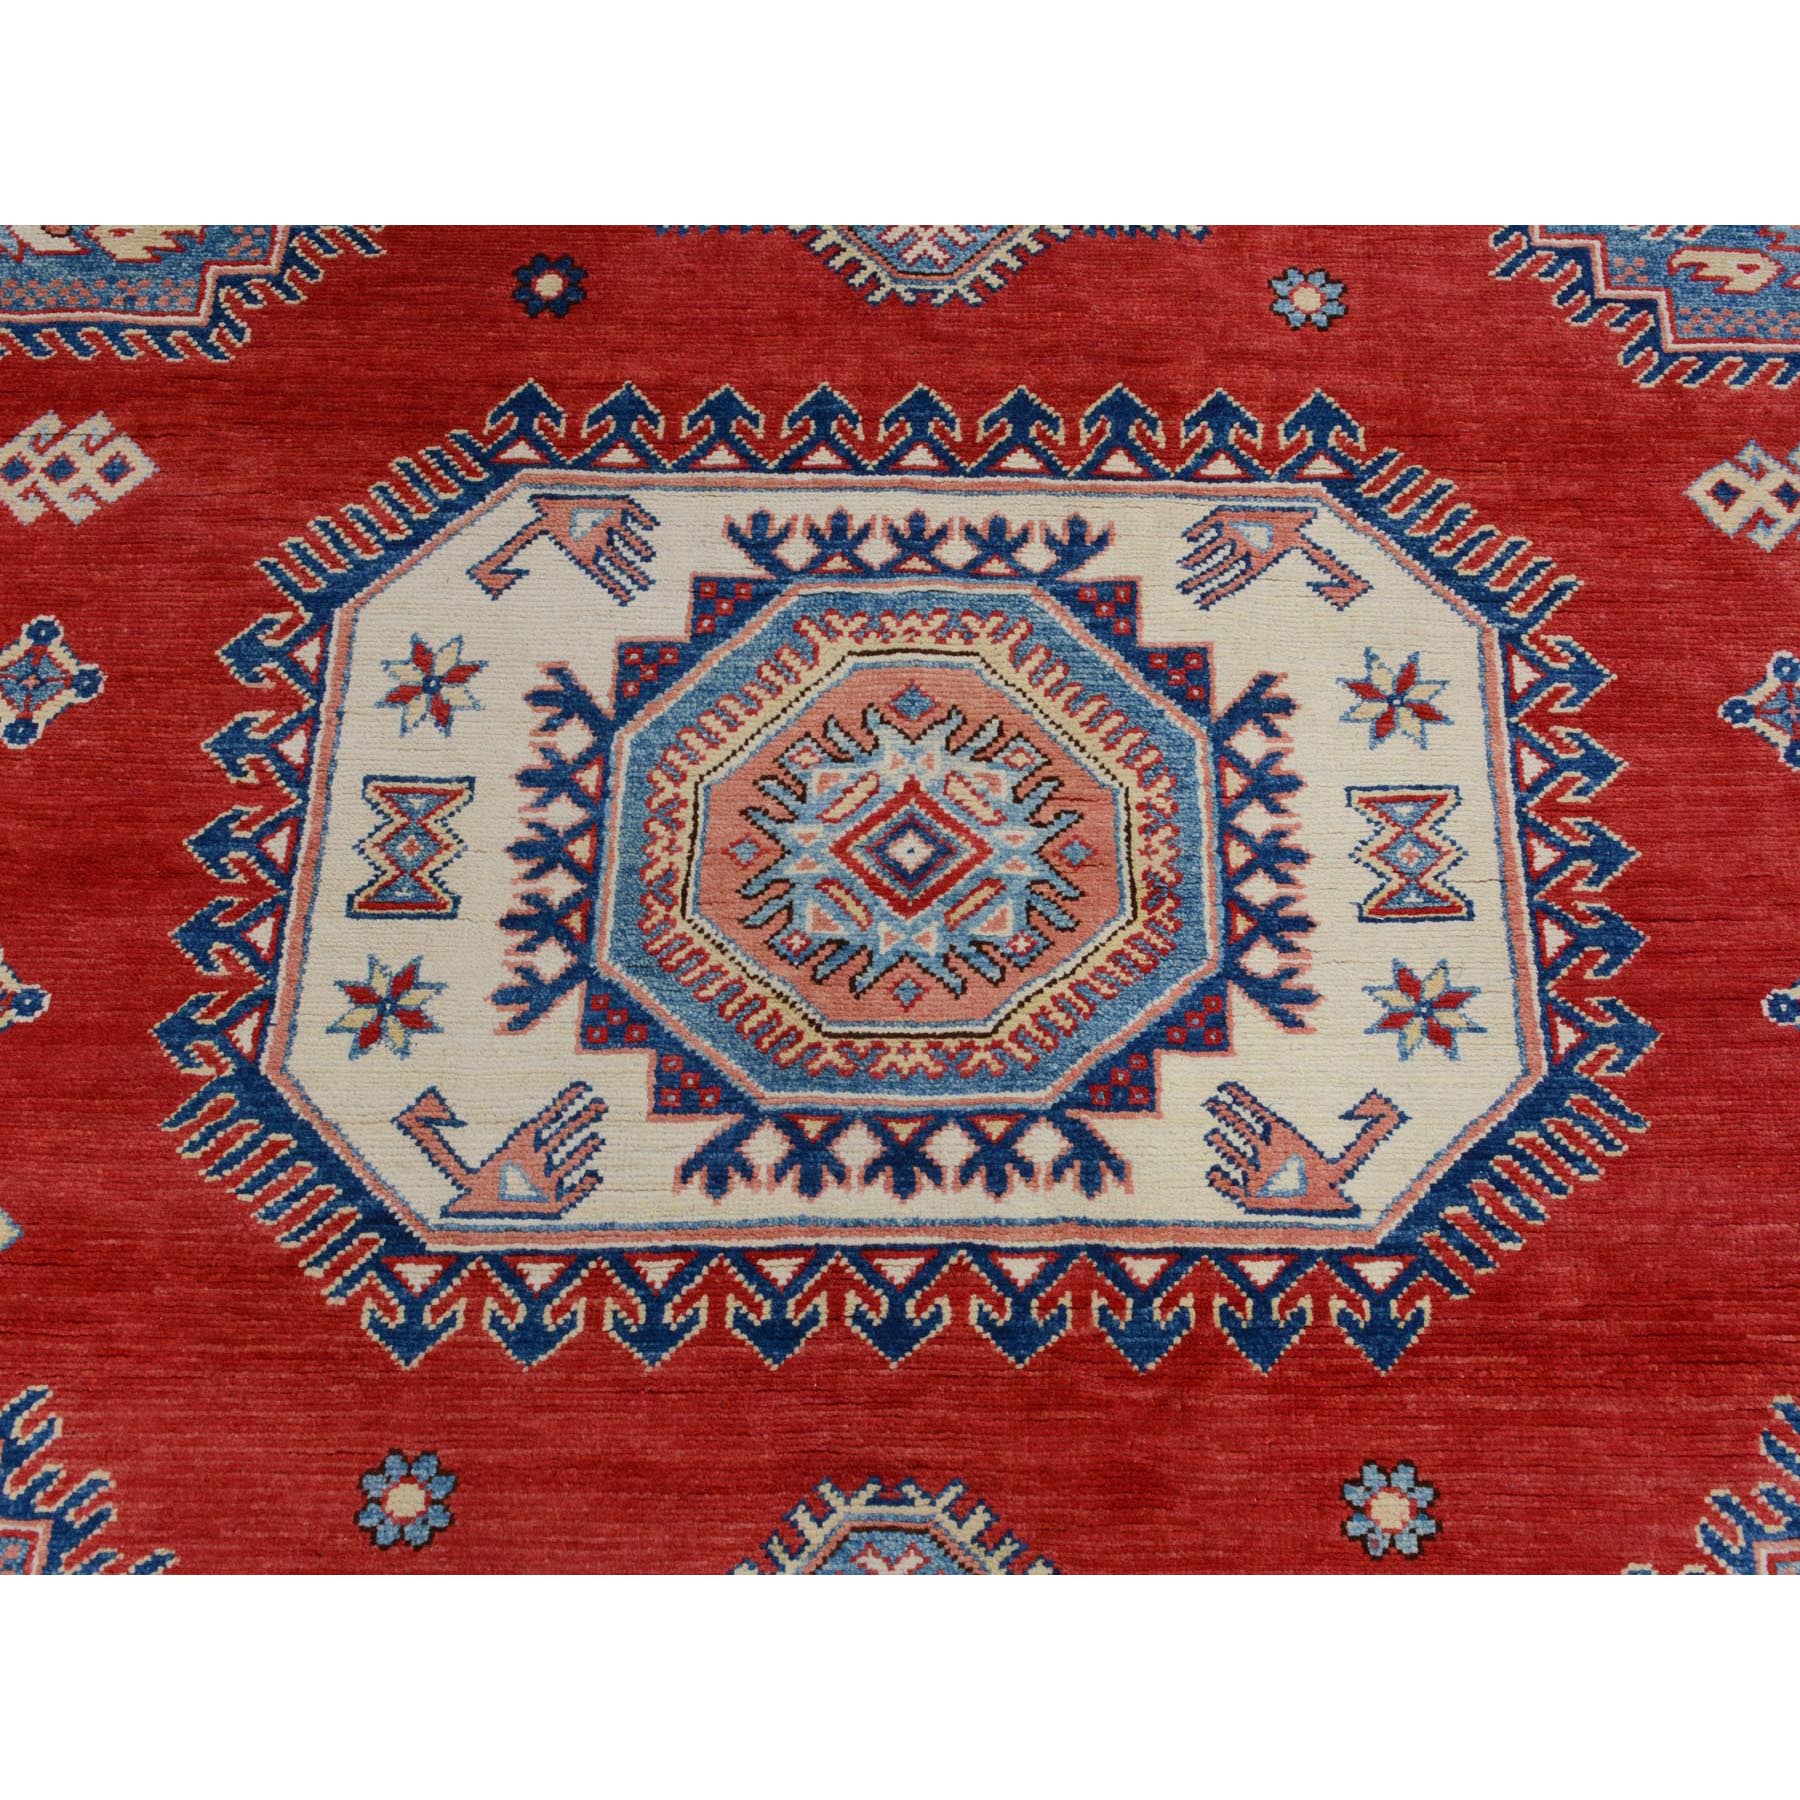 10-x13-10  Red Special kazak All Over Design Pure wool Hand Knotted Oriental Rug 